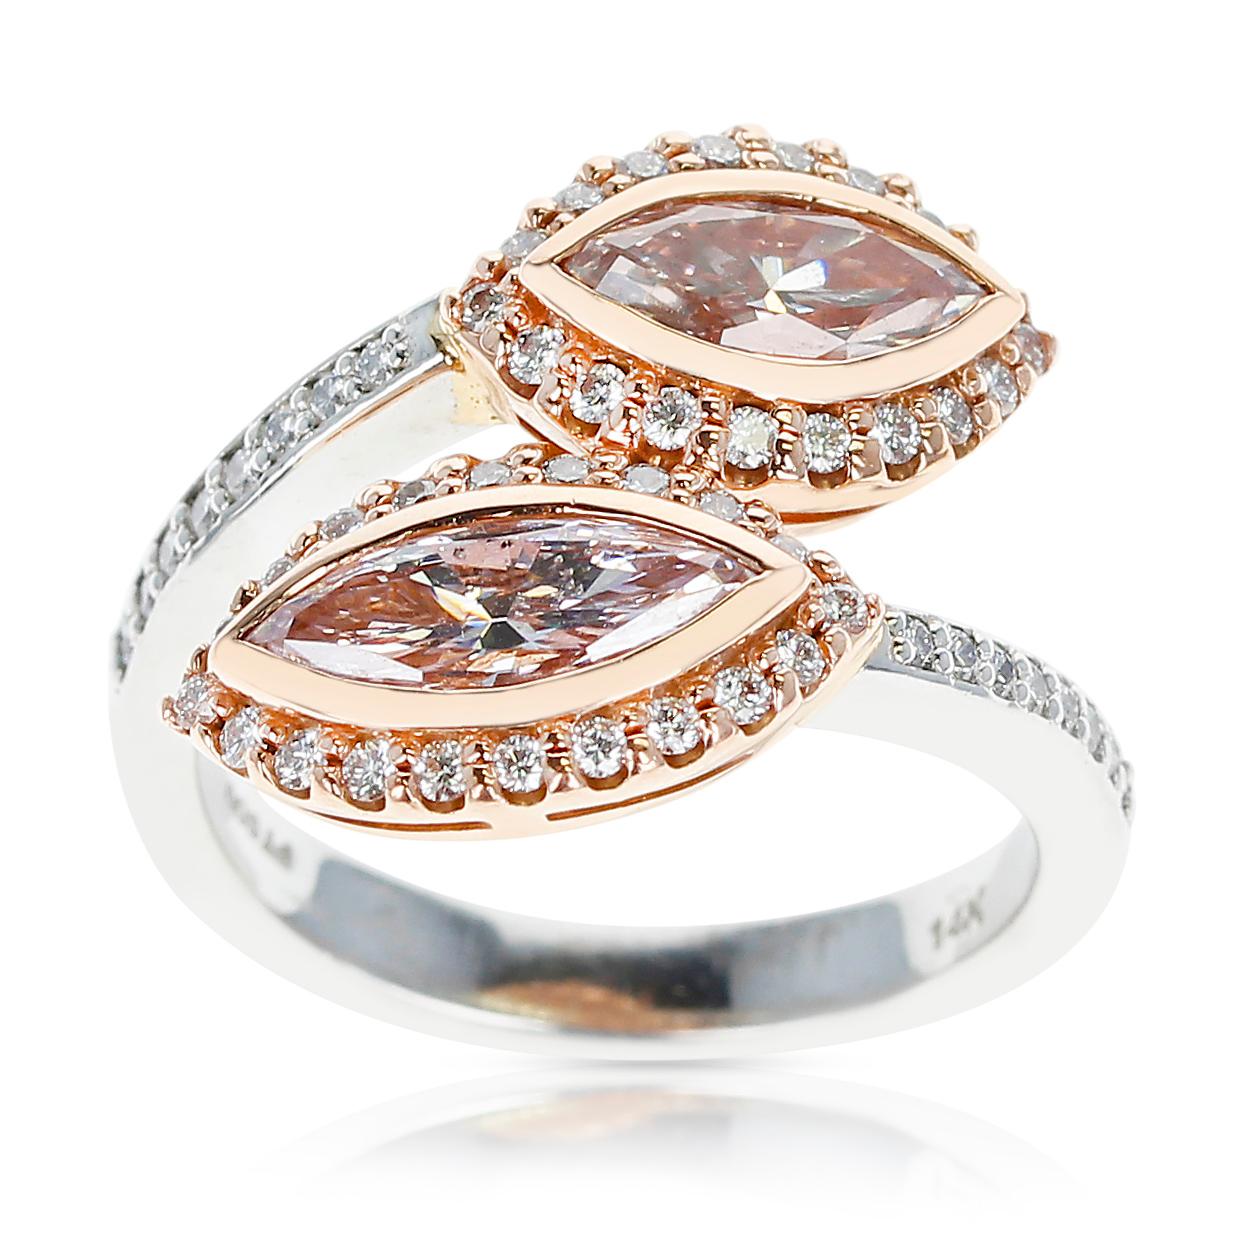 A stunning Twin Marquise Pink Diamond Ring accented with Pink and White Round Diamonds. Ring Size US 7.25. Total Weight: 9.32 grams. Made in 14 Karat Gold. 